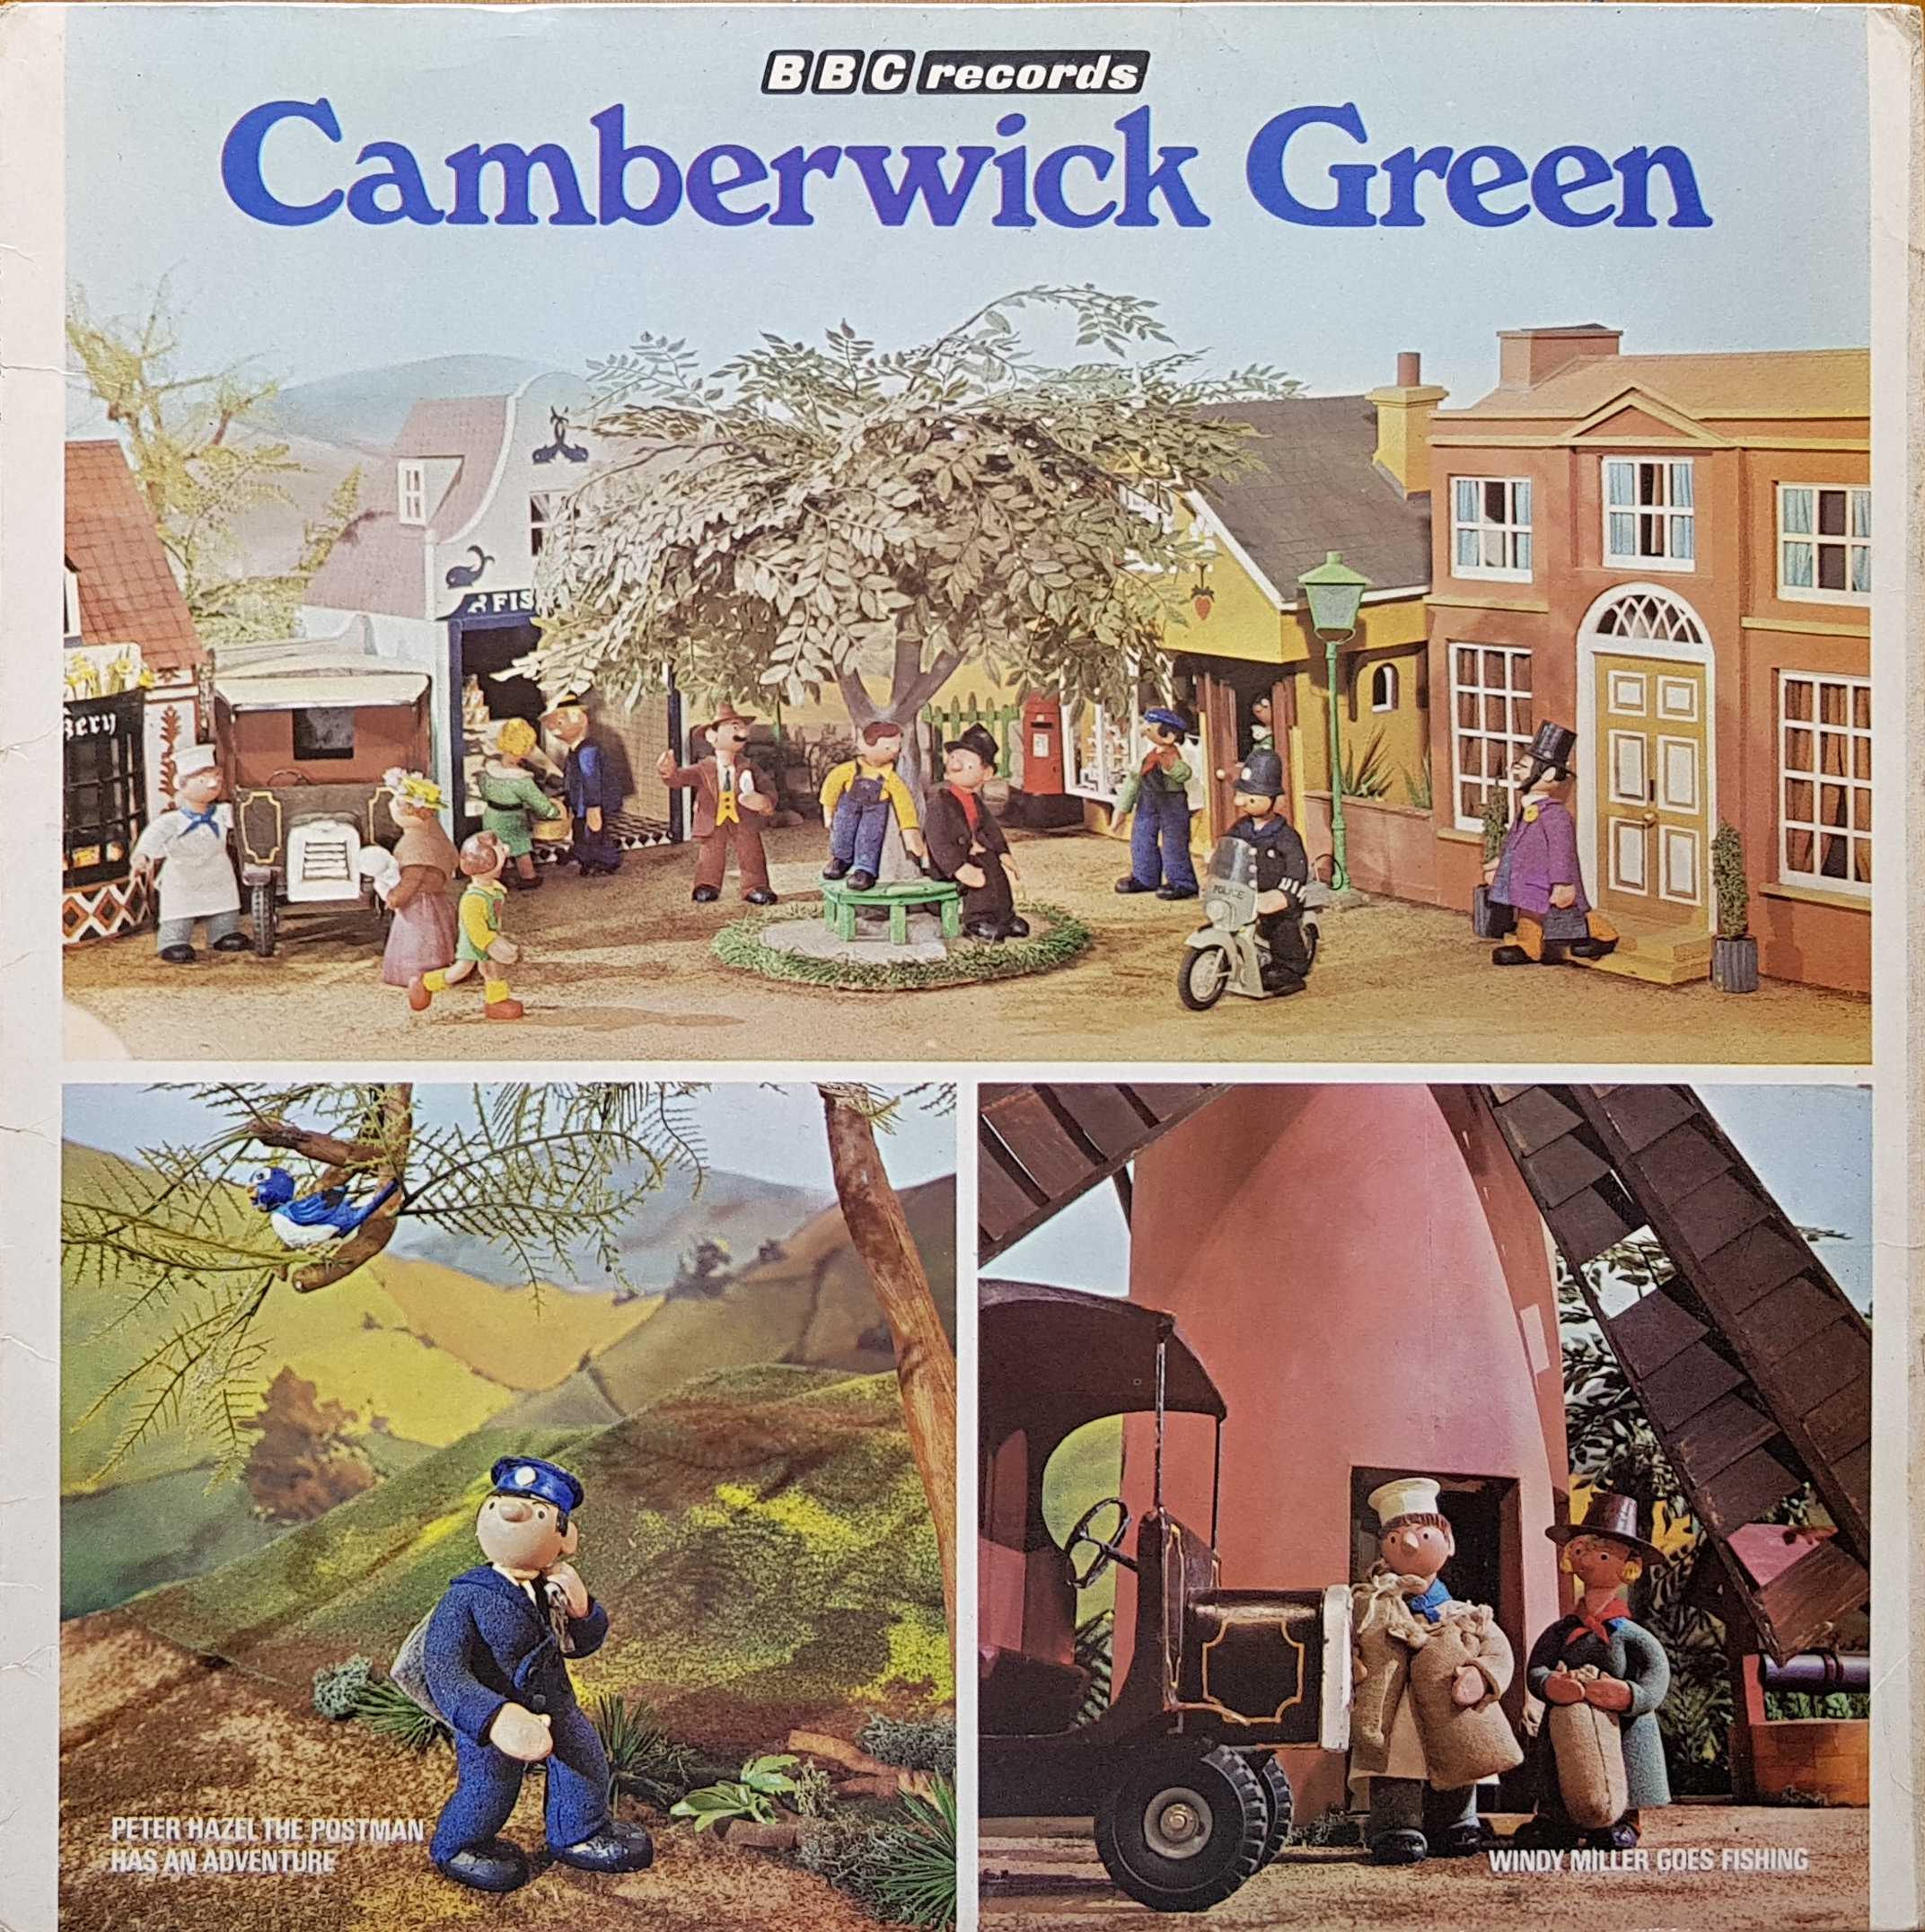 Picture of Camberwick Green by artist Brian Cant / Freddie Phillips from the BBC albums - Records and Tapes library